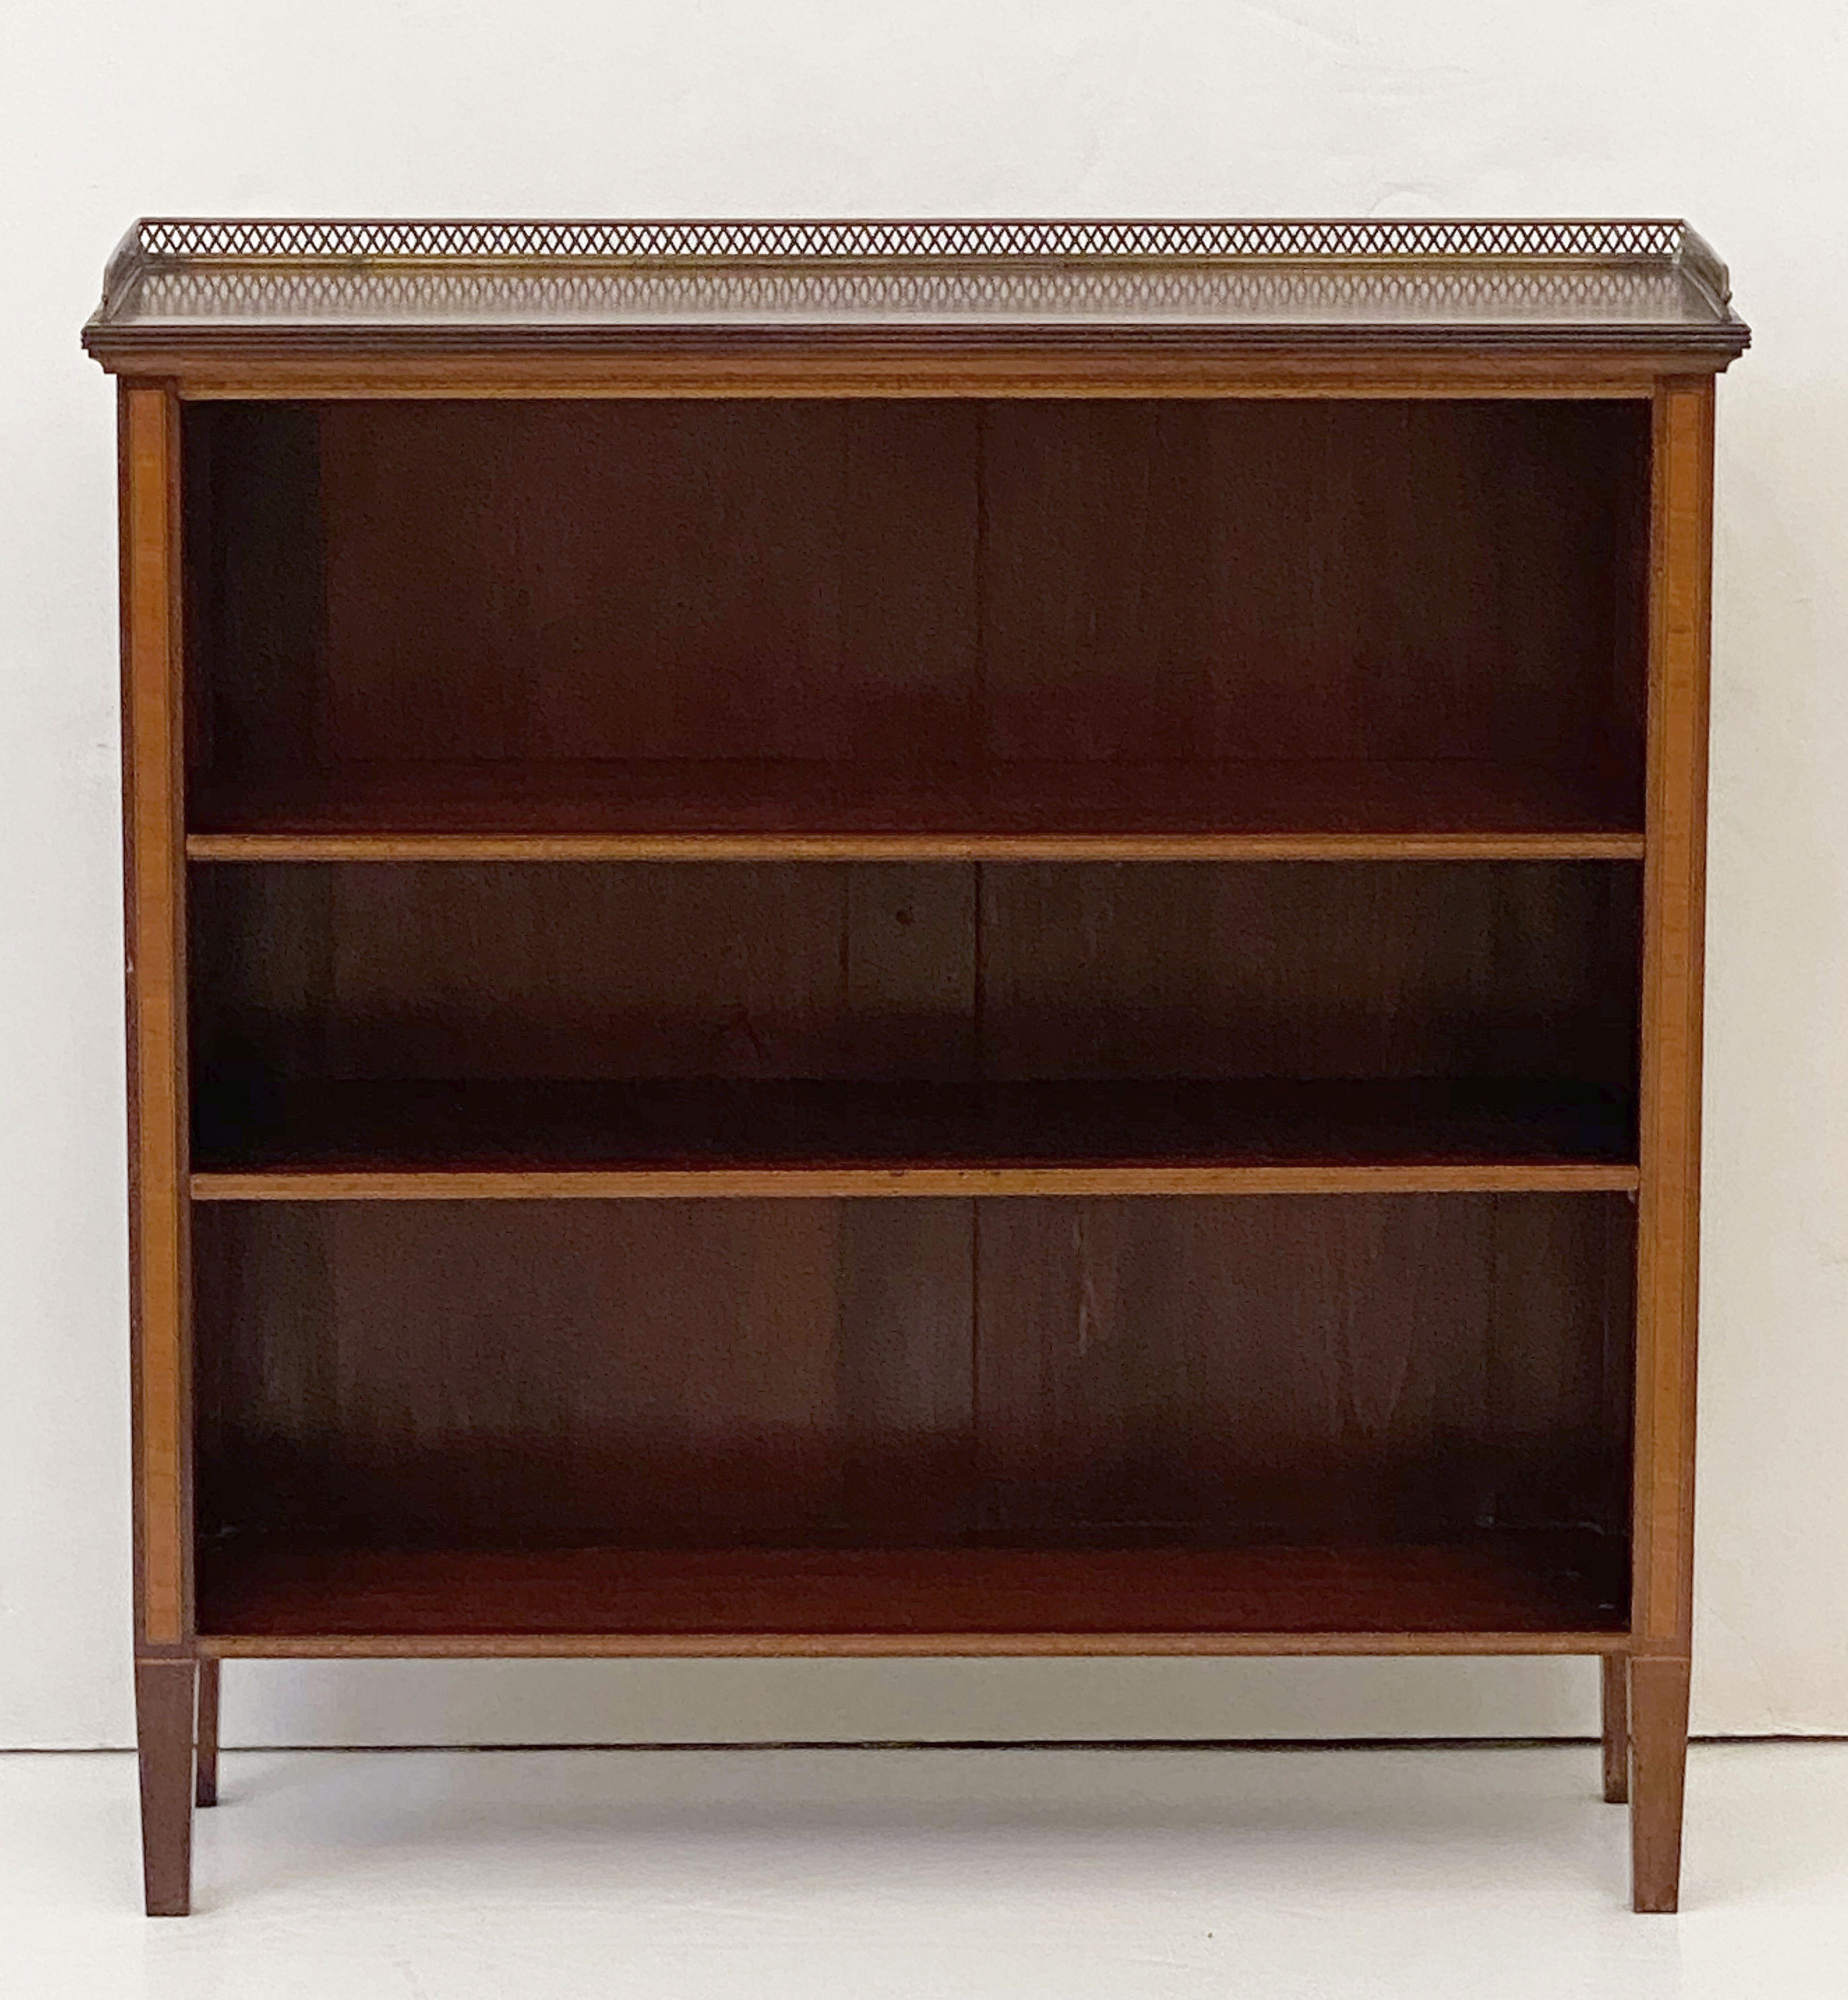 A fine English open bookcase of inlaid mahogany from the Edwardian era, featuring a moulded top with a pierced brass gallery over a frieze of two adjustable shelves and standing on four tapering feet.

With brass emblem on back: Thomas & Company,